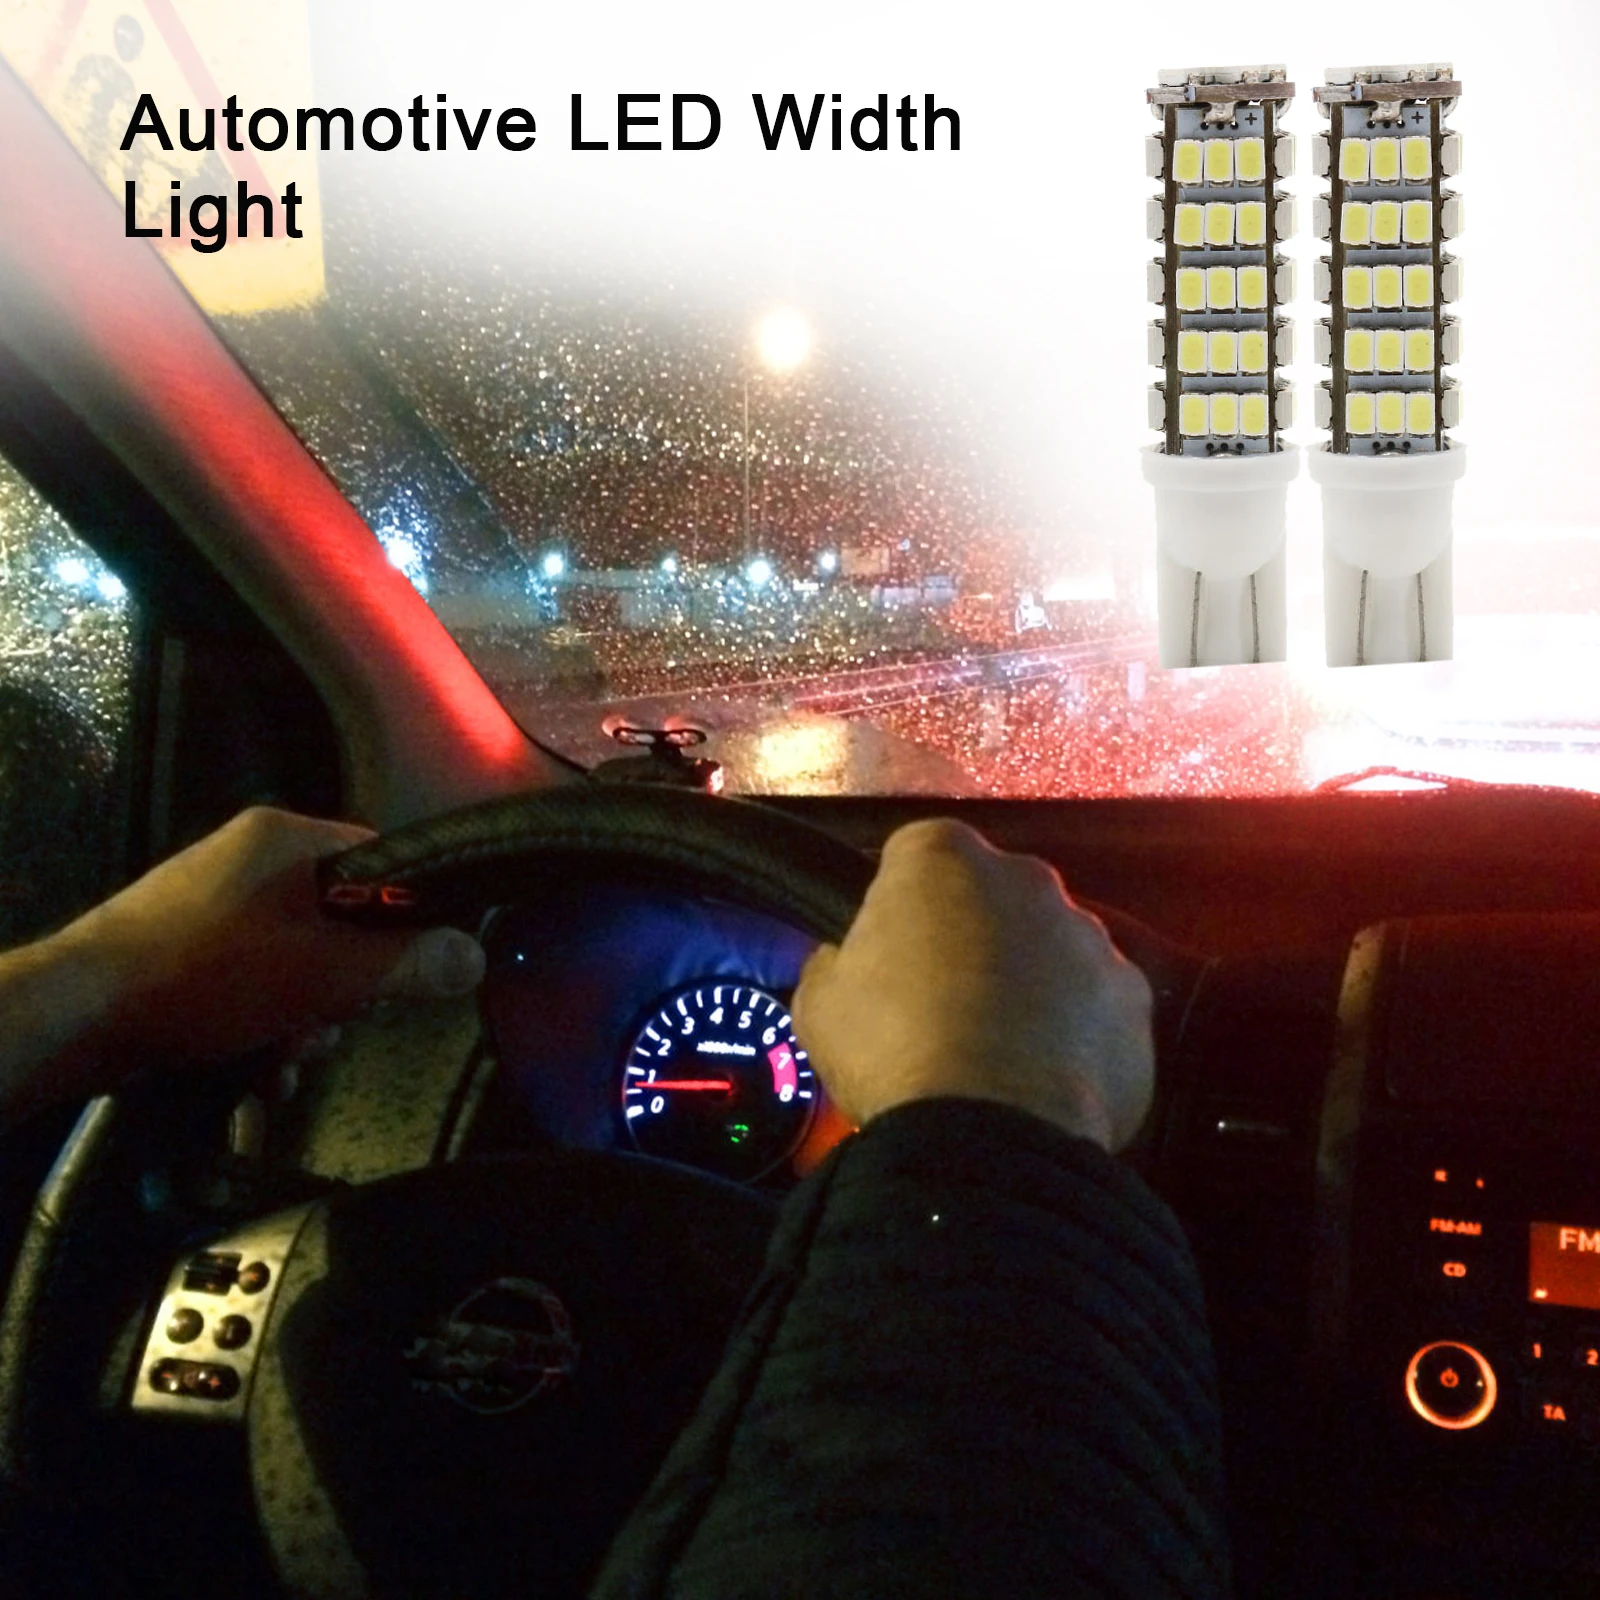 

2Pcs T10 W5W 68 LED 194 501 1206 SMD Car Styling Interior Lights Clearance Lamp Marker Lamps Auto Bulbs DC 12V Accessories New